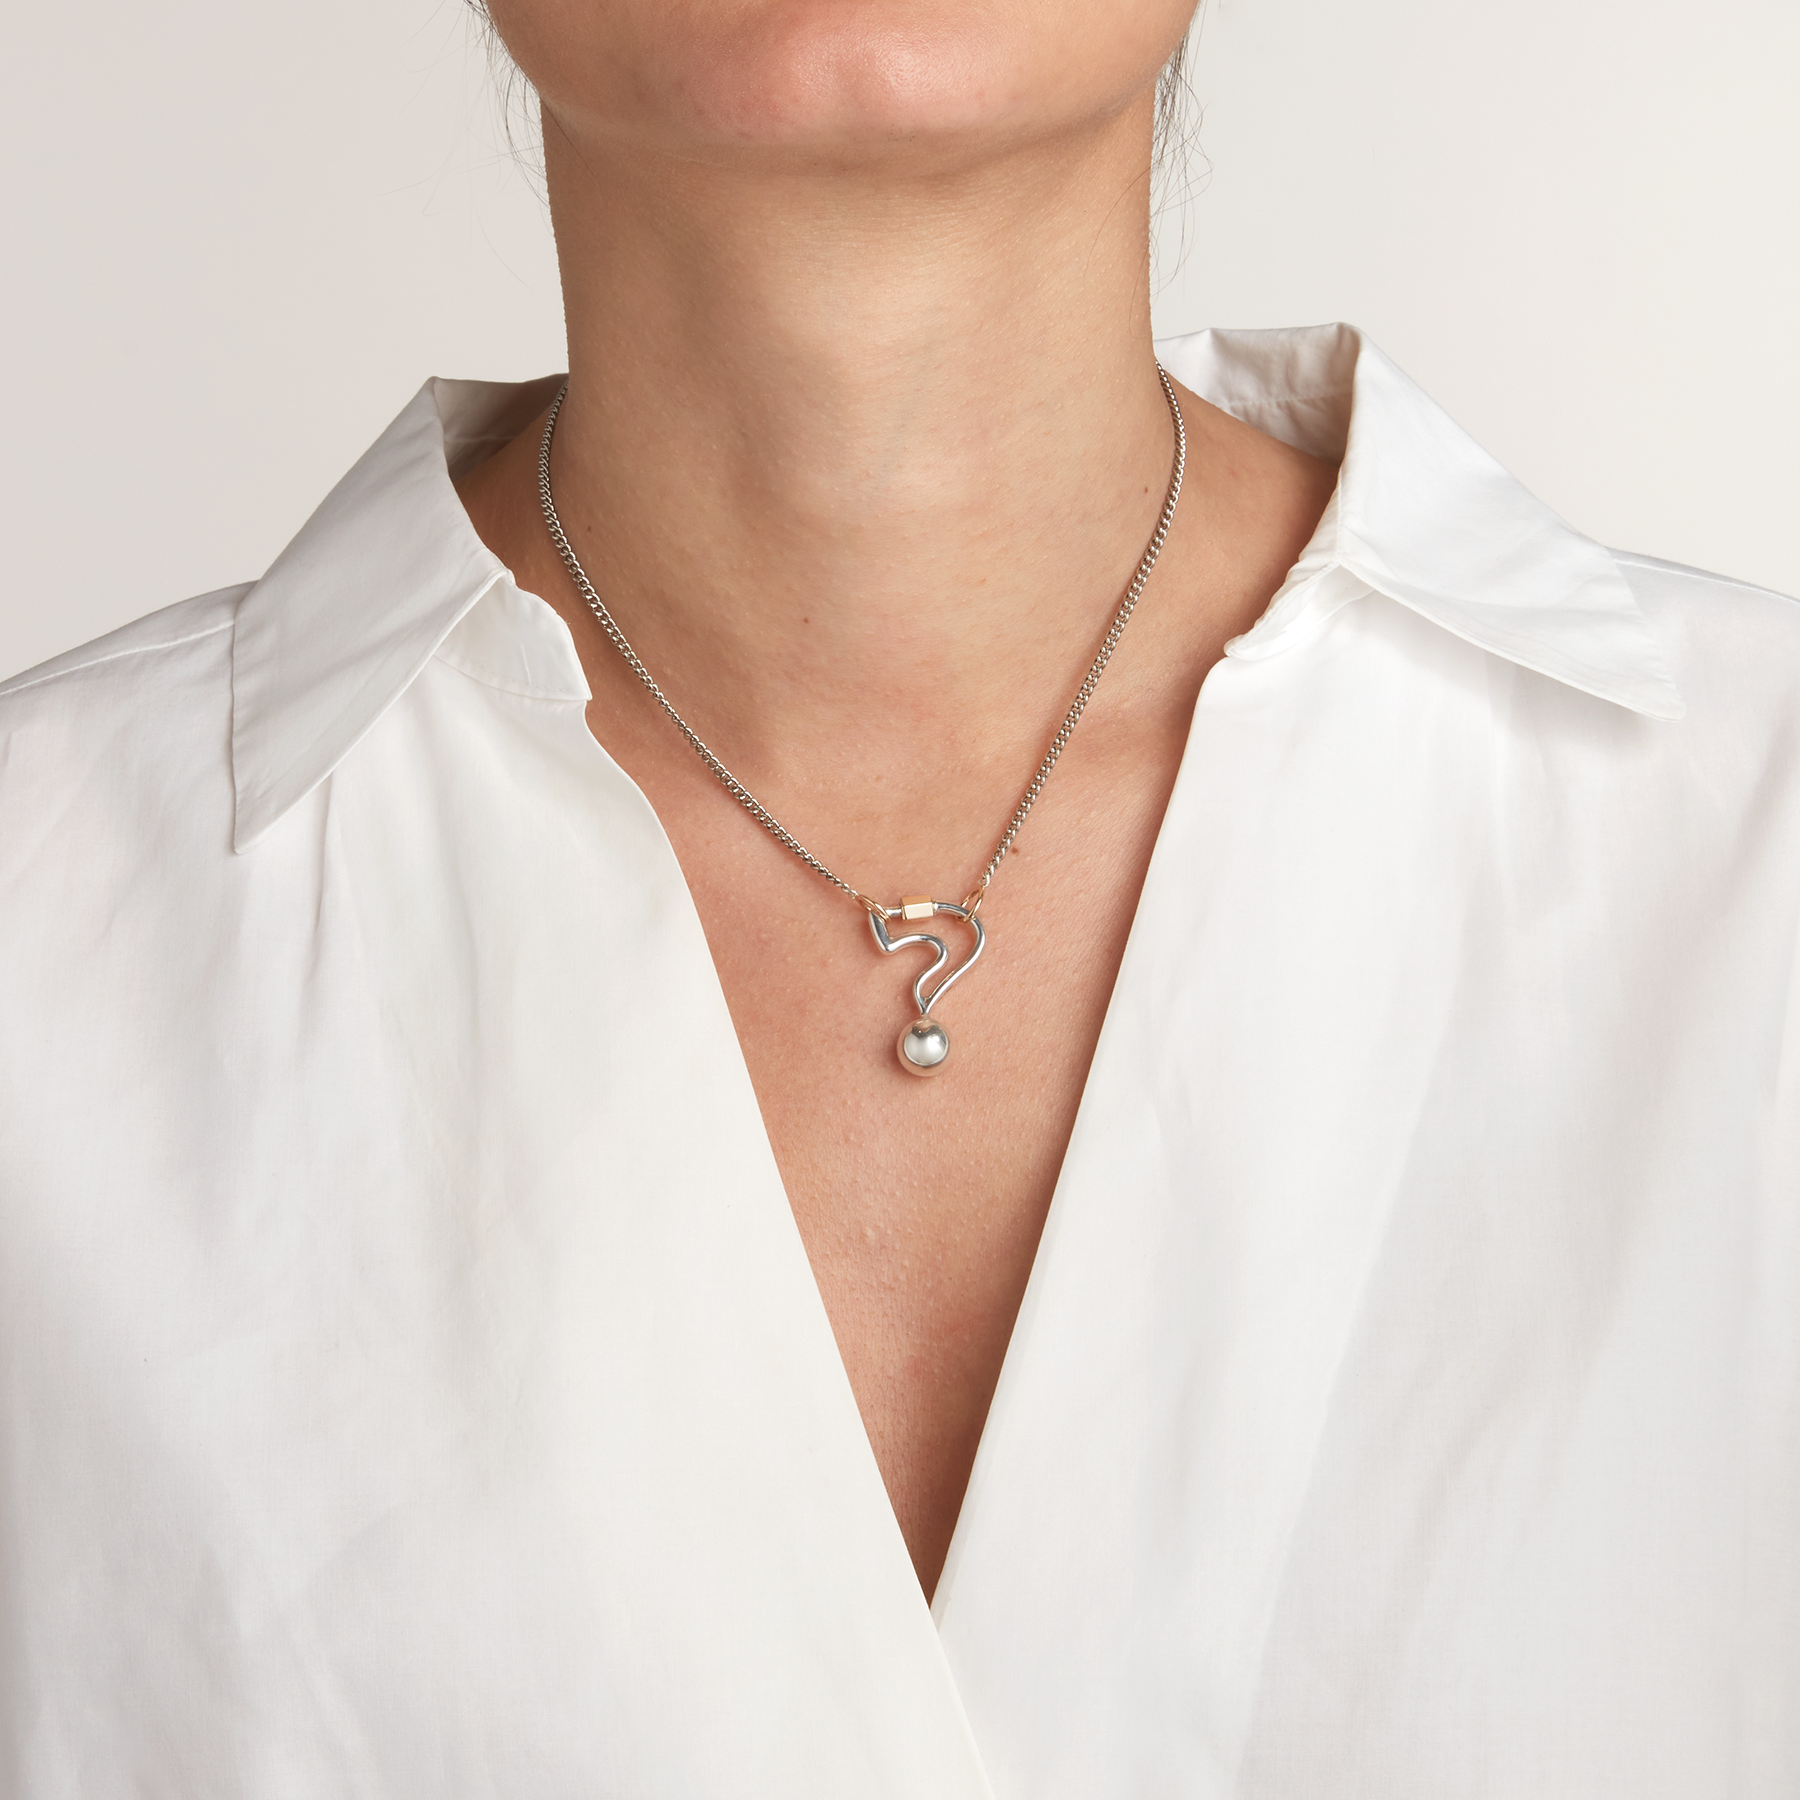 Close up of woman's decolletage wearing silver question mark jewelry